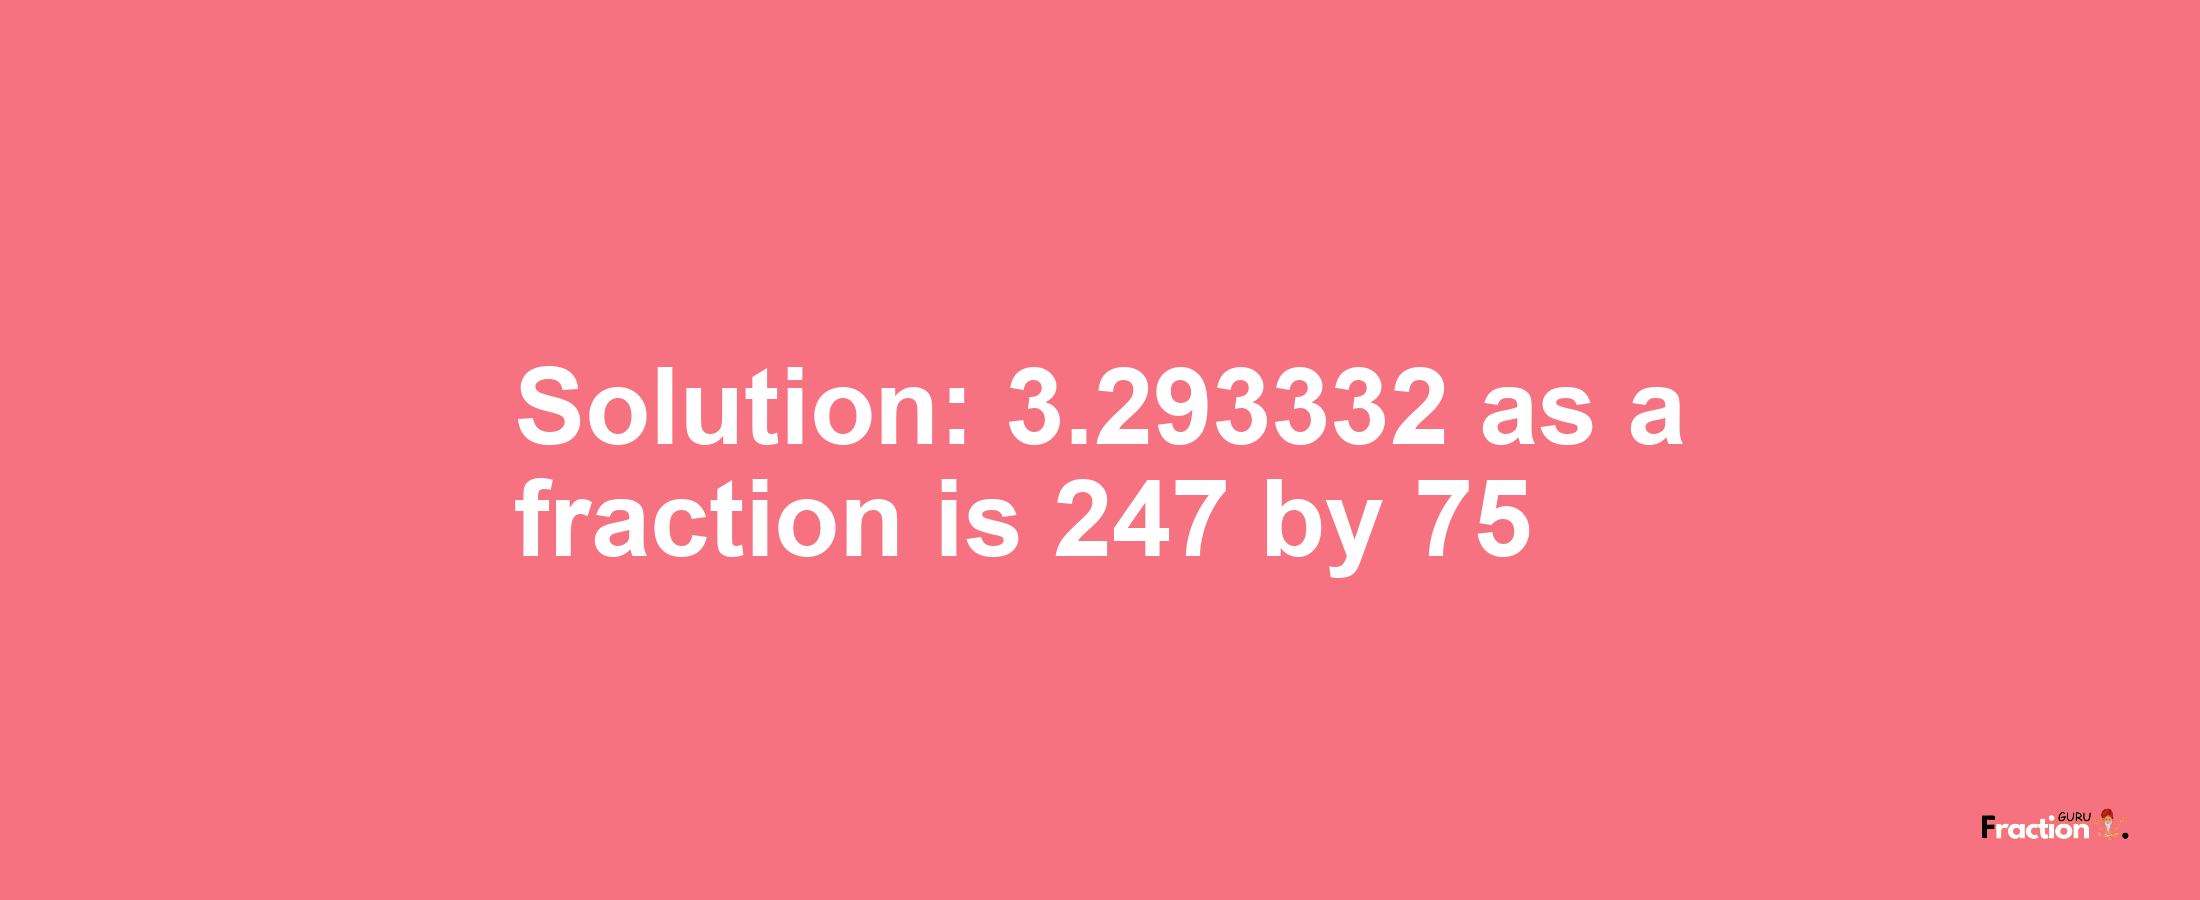 Solution:3.293332 as a fraction is 247/75